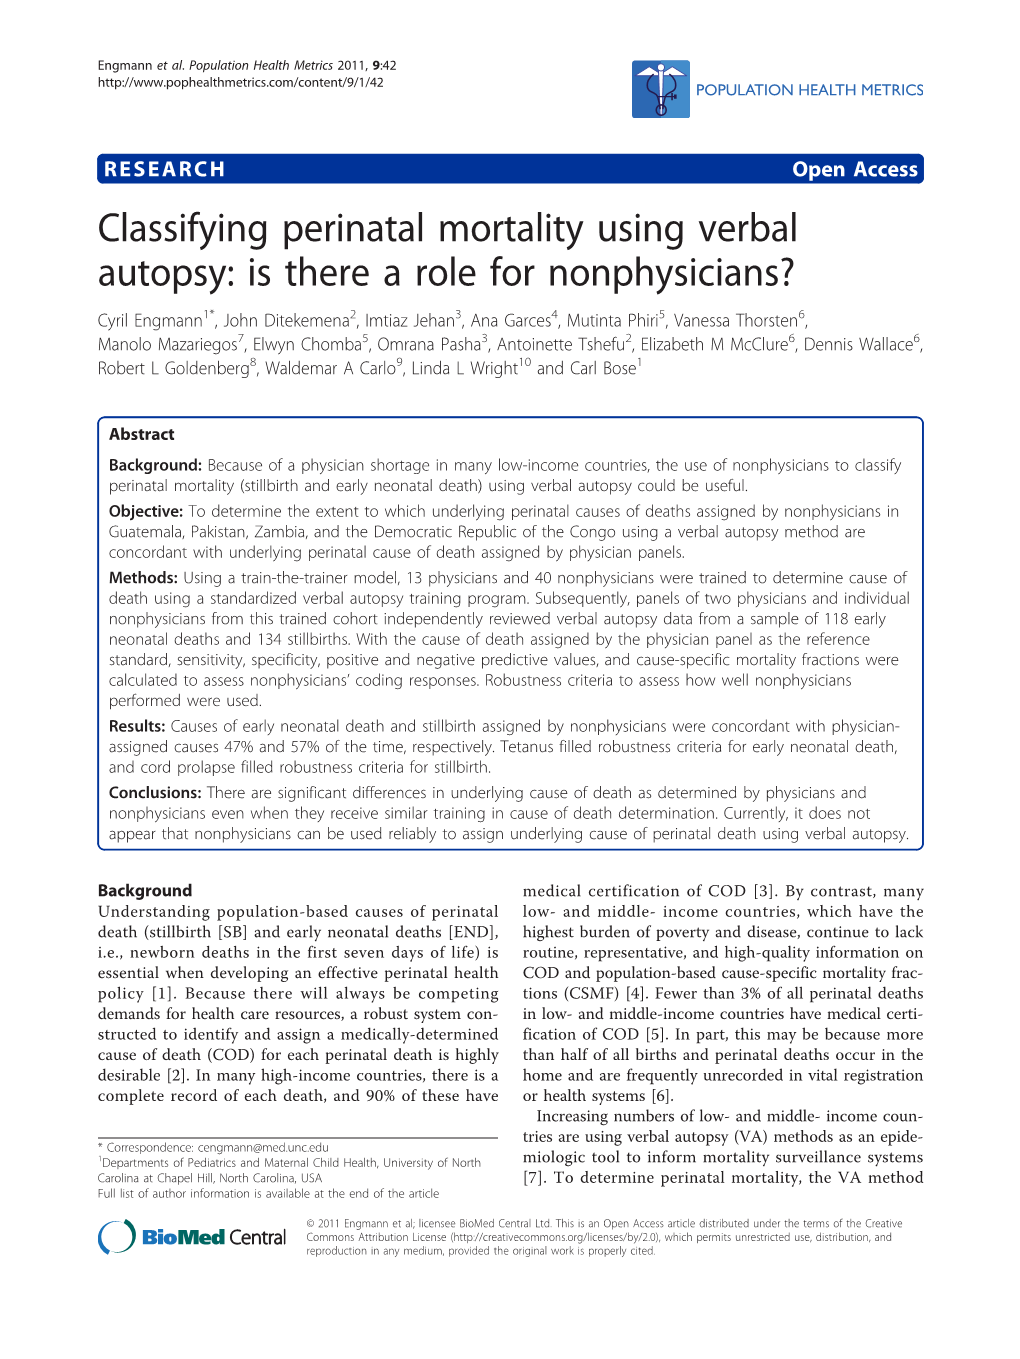 Classifying Perinatal Mortality Using Verbal Autopsy: Is There a Role For